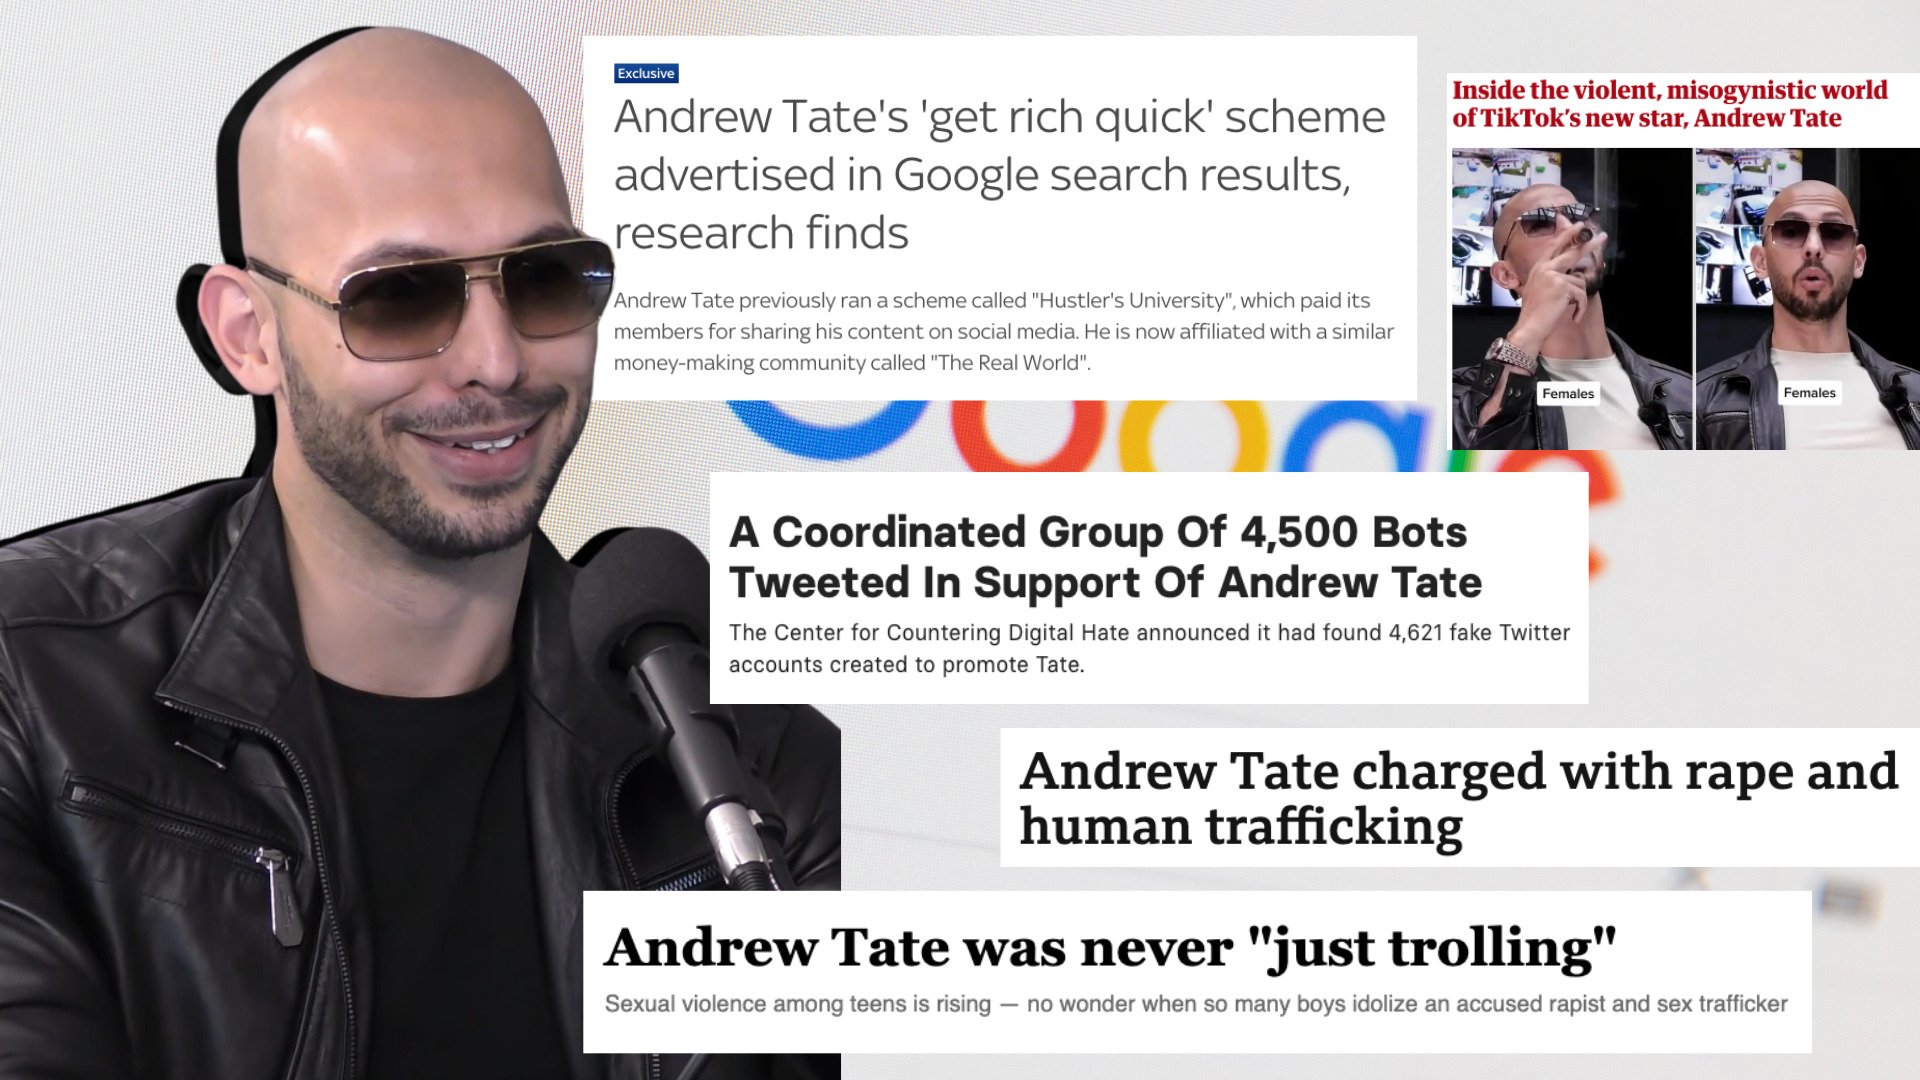 Andrew Tate countering digital hate